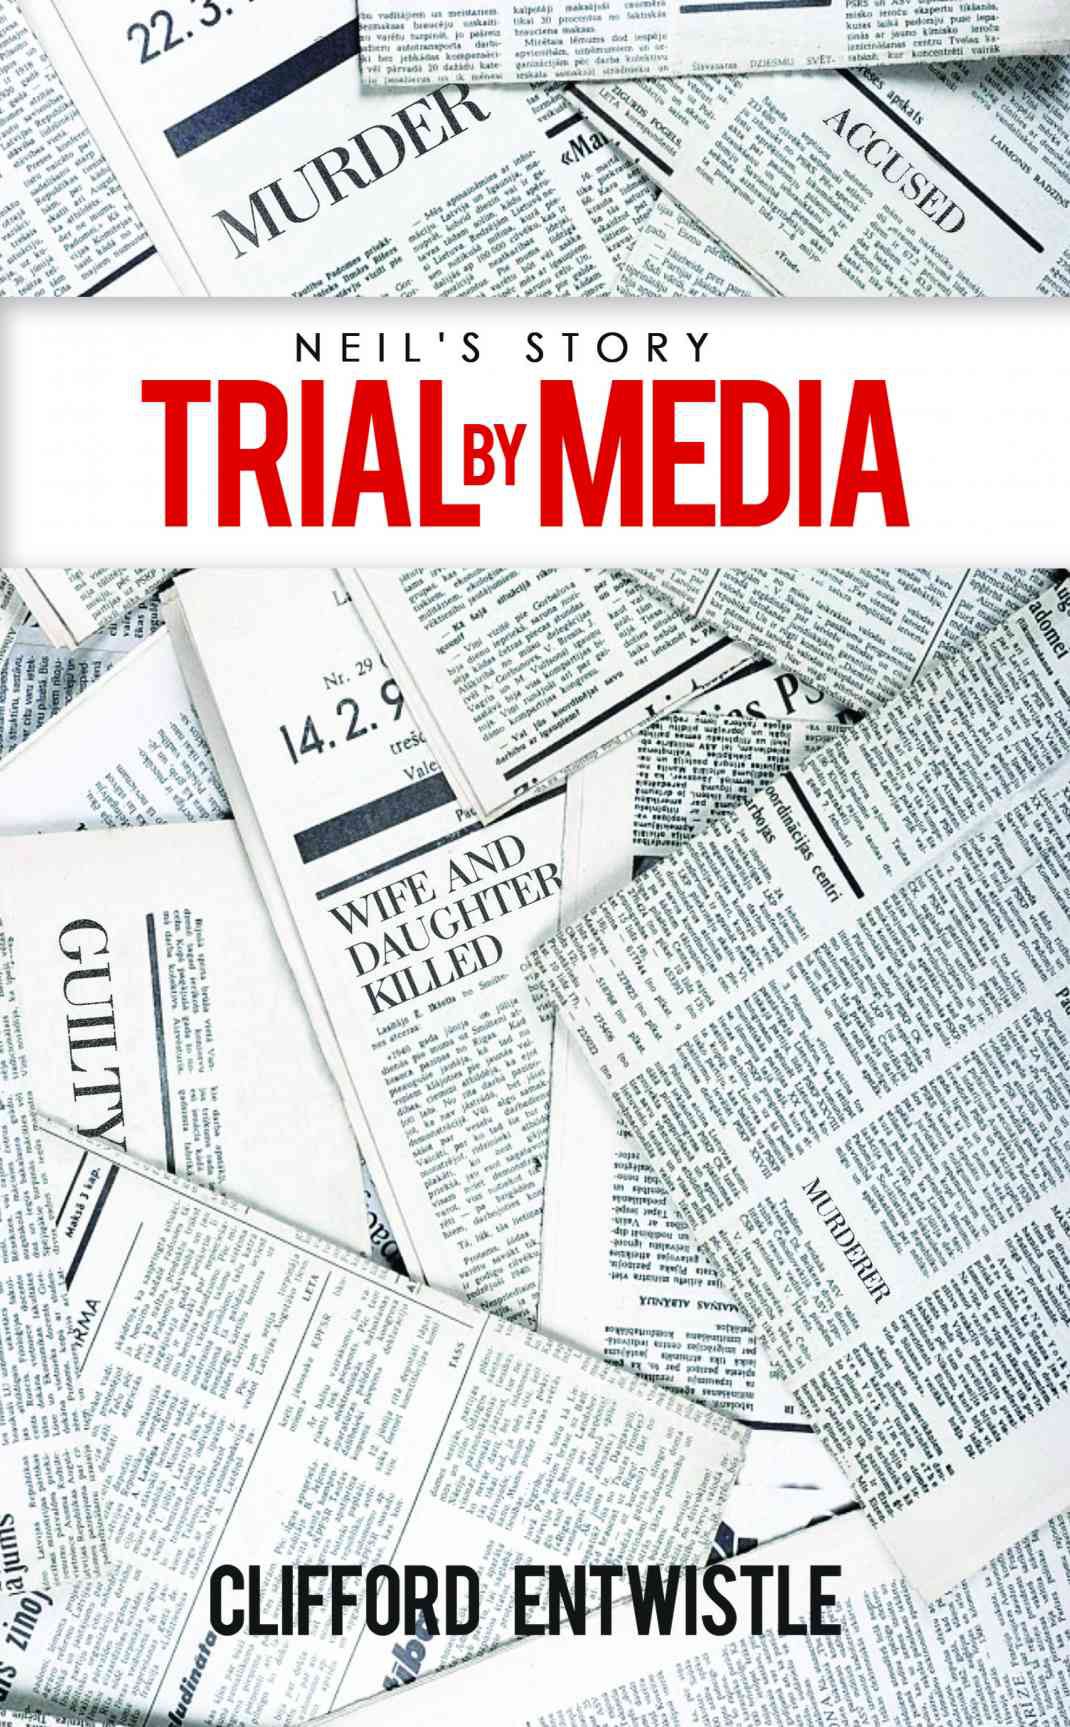 NottinghamshireLive Featured an article about ‘Neil's Story: Trial by Media’ by Cliff Entwistle